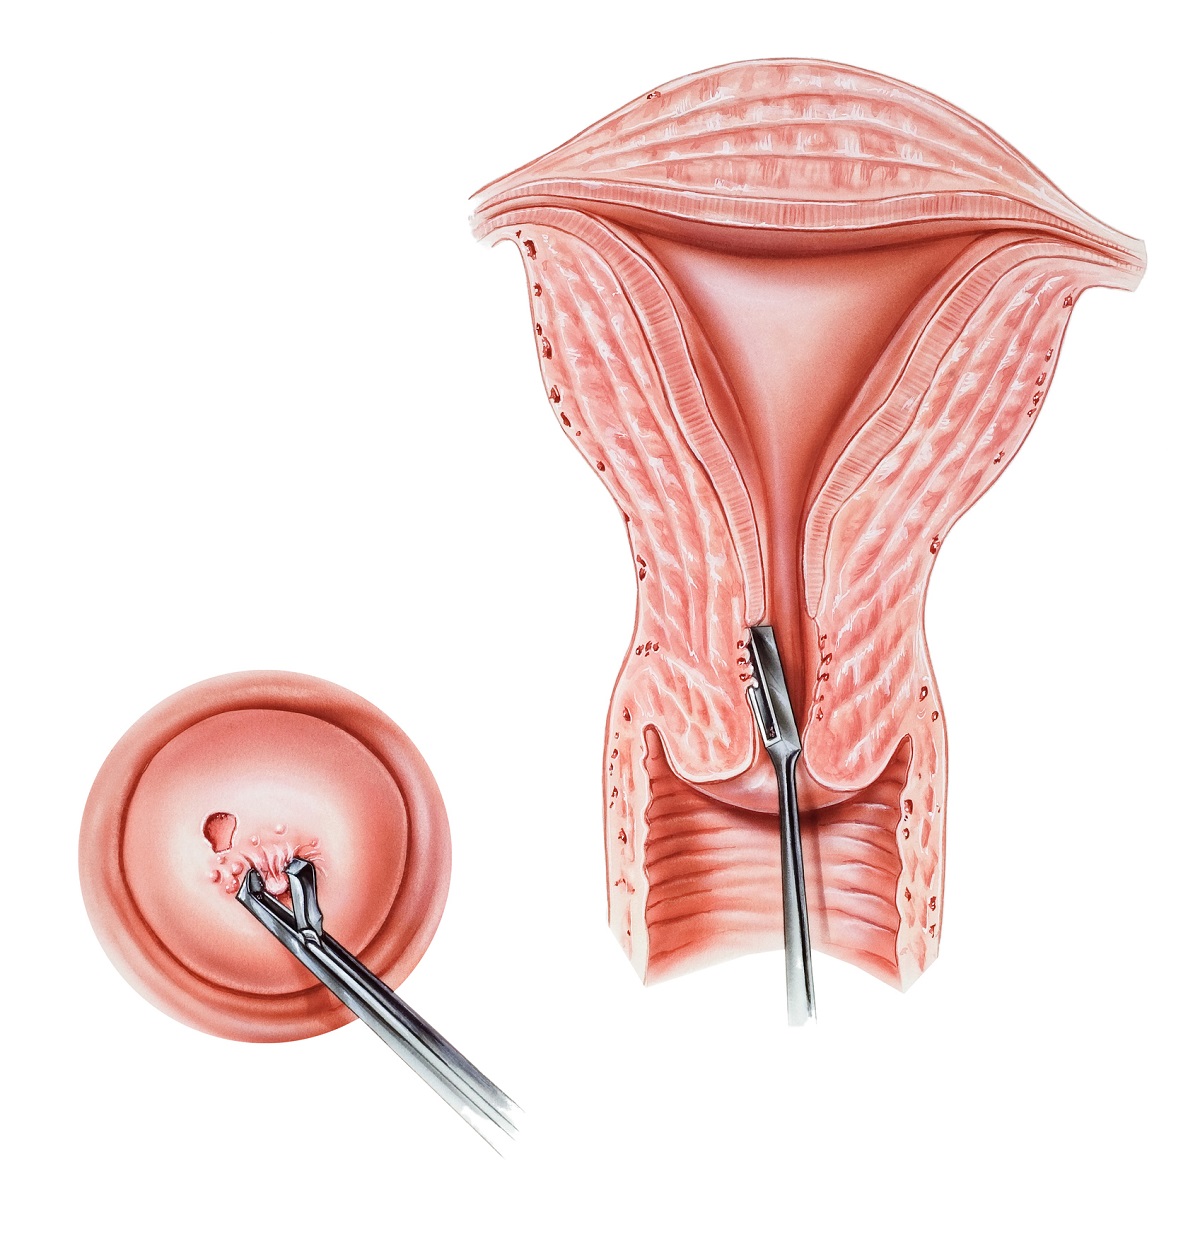 A biopsy is the taking of a tissue sample from the cervix. Source: Getty Images.